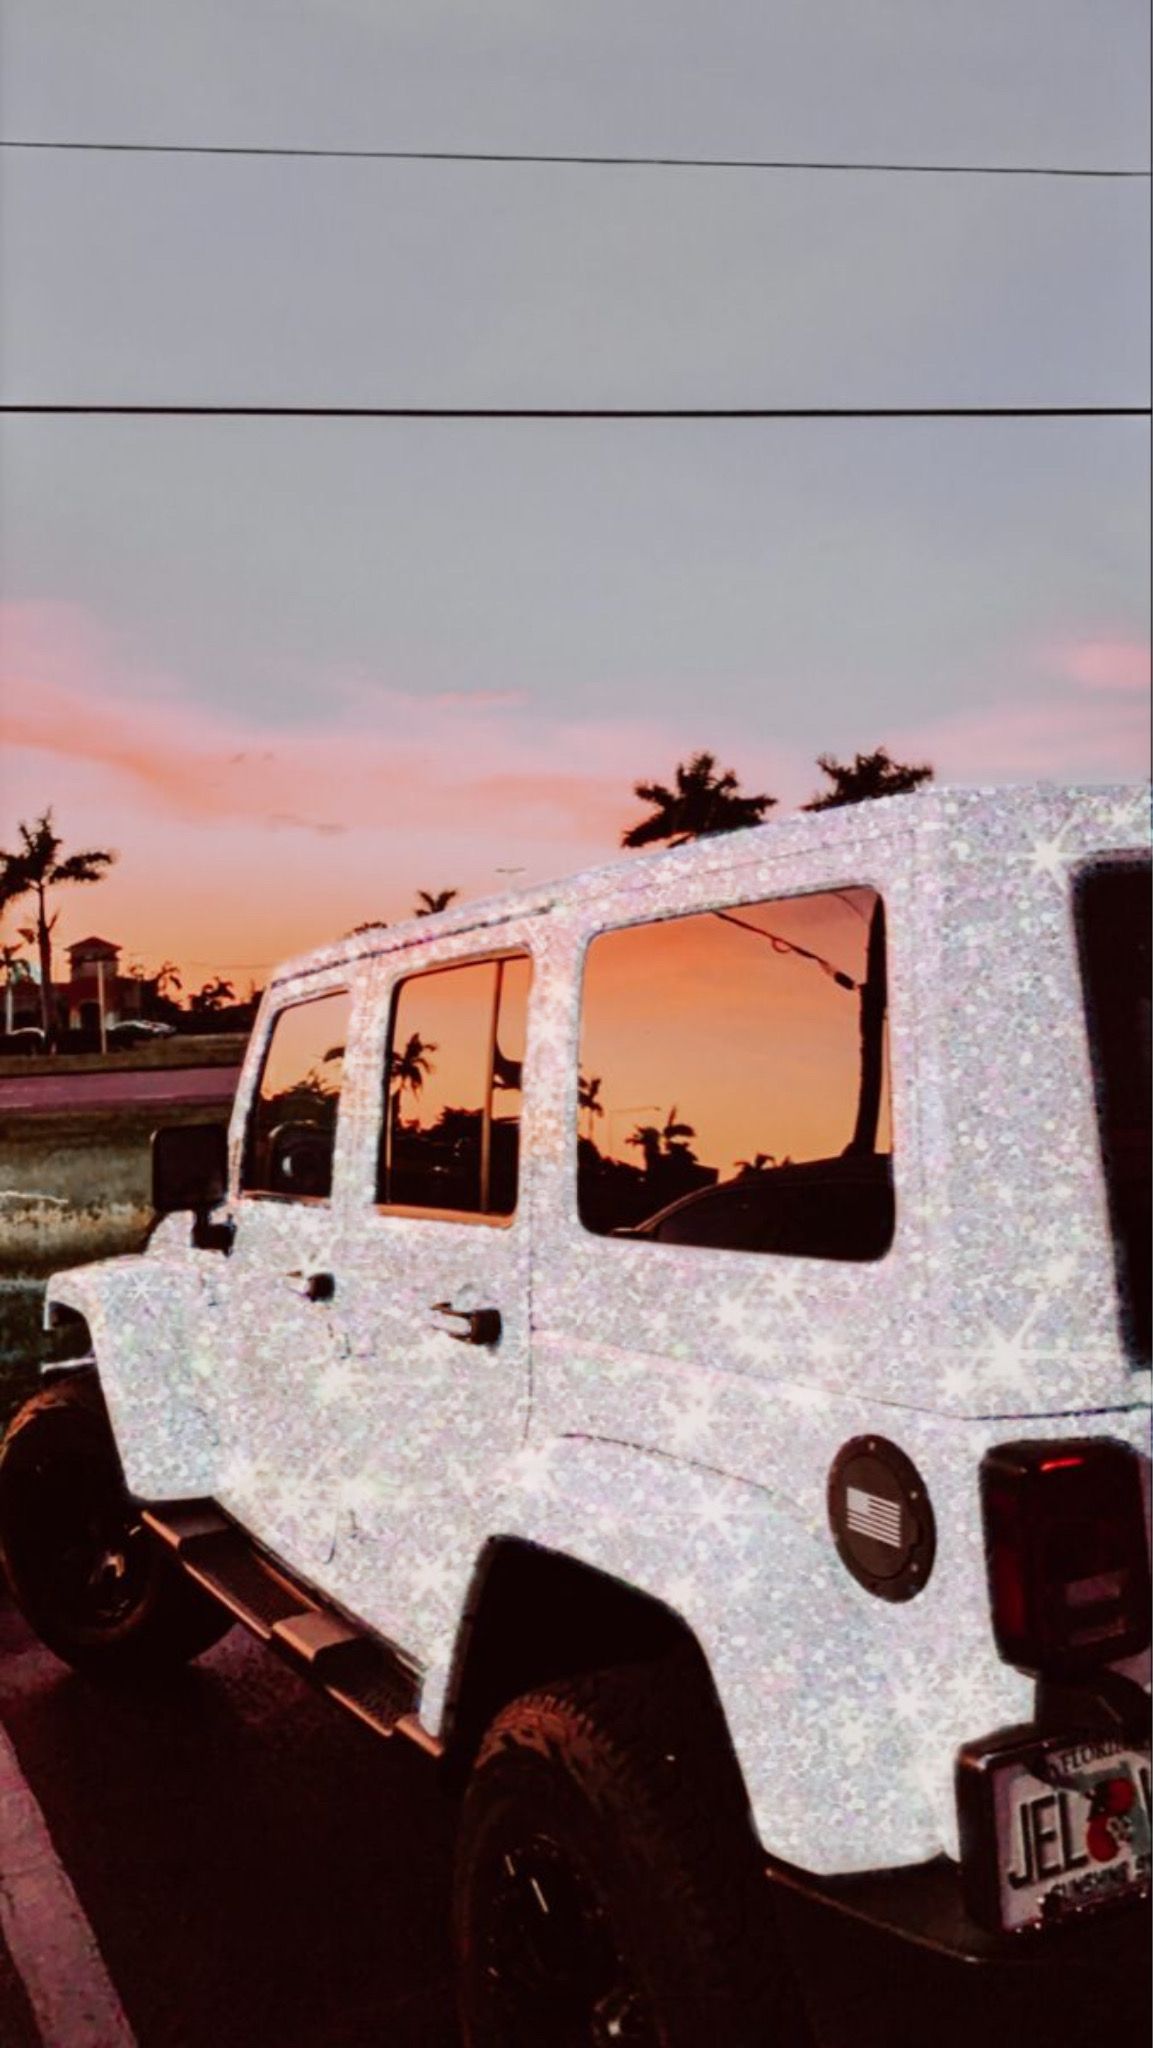 Glitter Jeep sunset. iPhone wallpaper tumblr aesthetic, Wall collage, Sunset